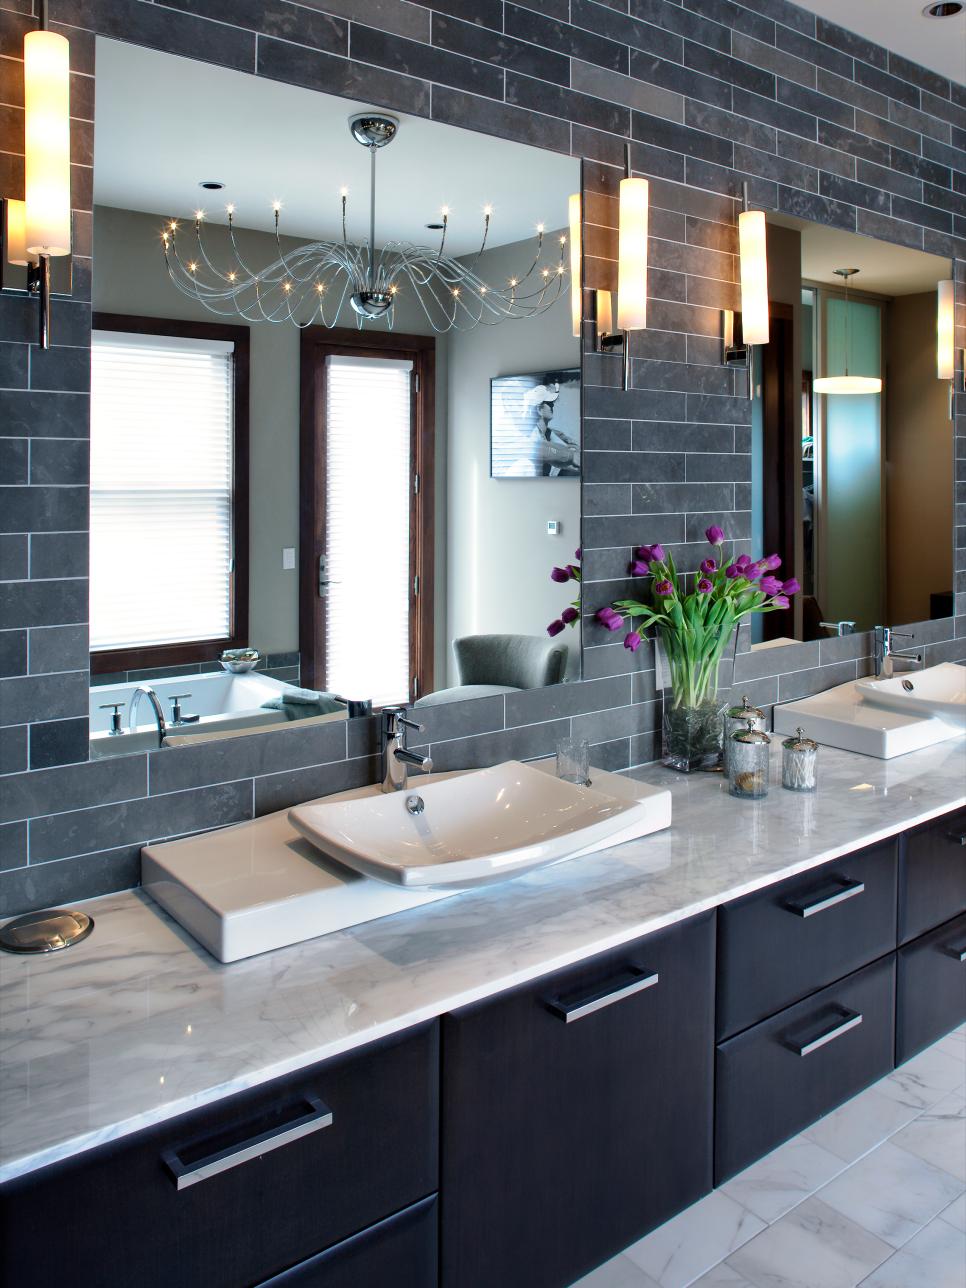 Contemporary Double-Vanity Bathroom With Gray Tiled Wall | HGTV